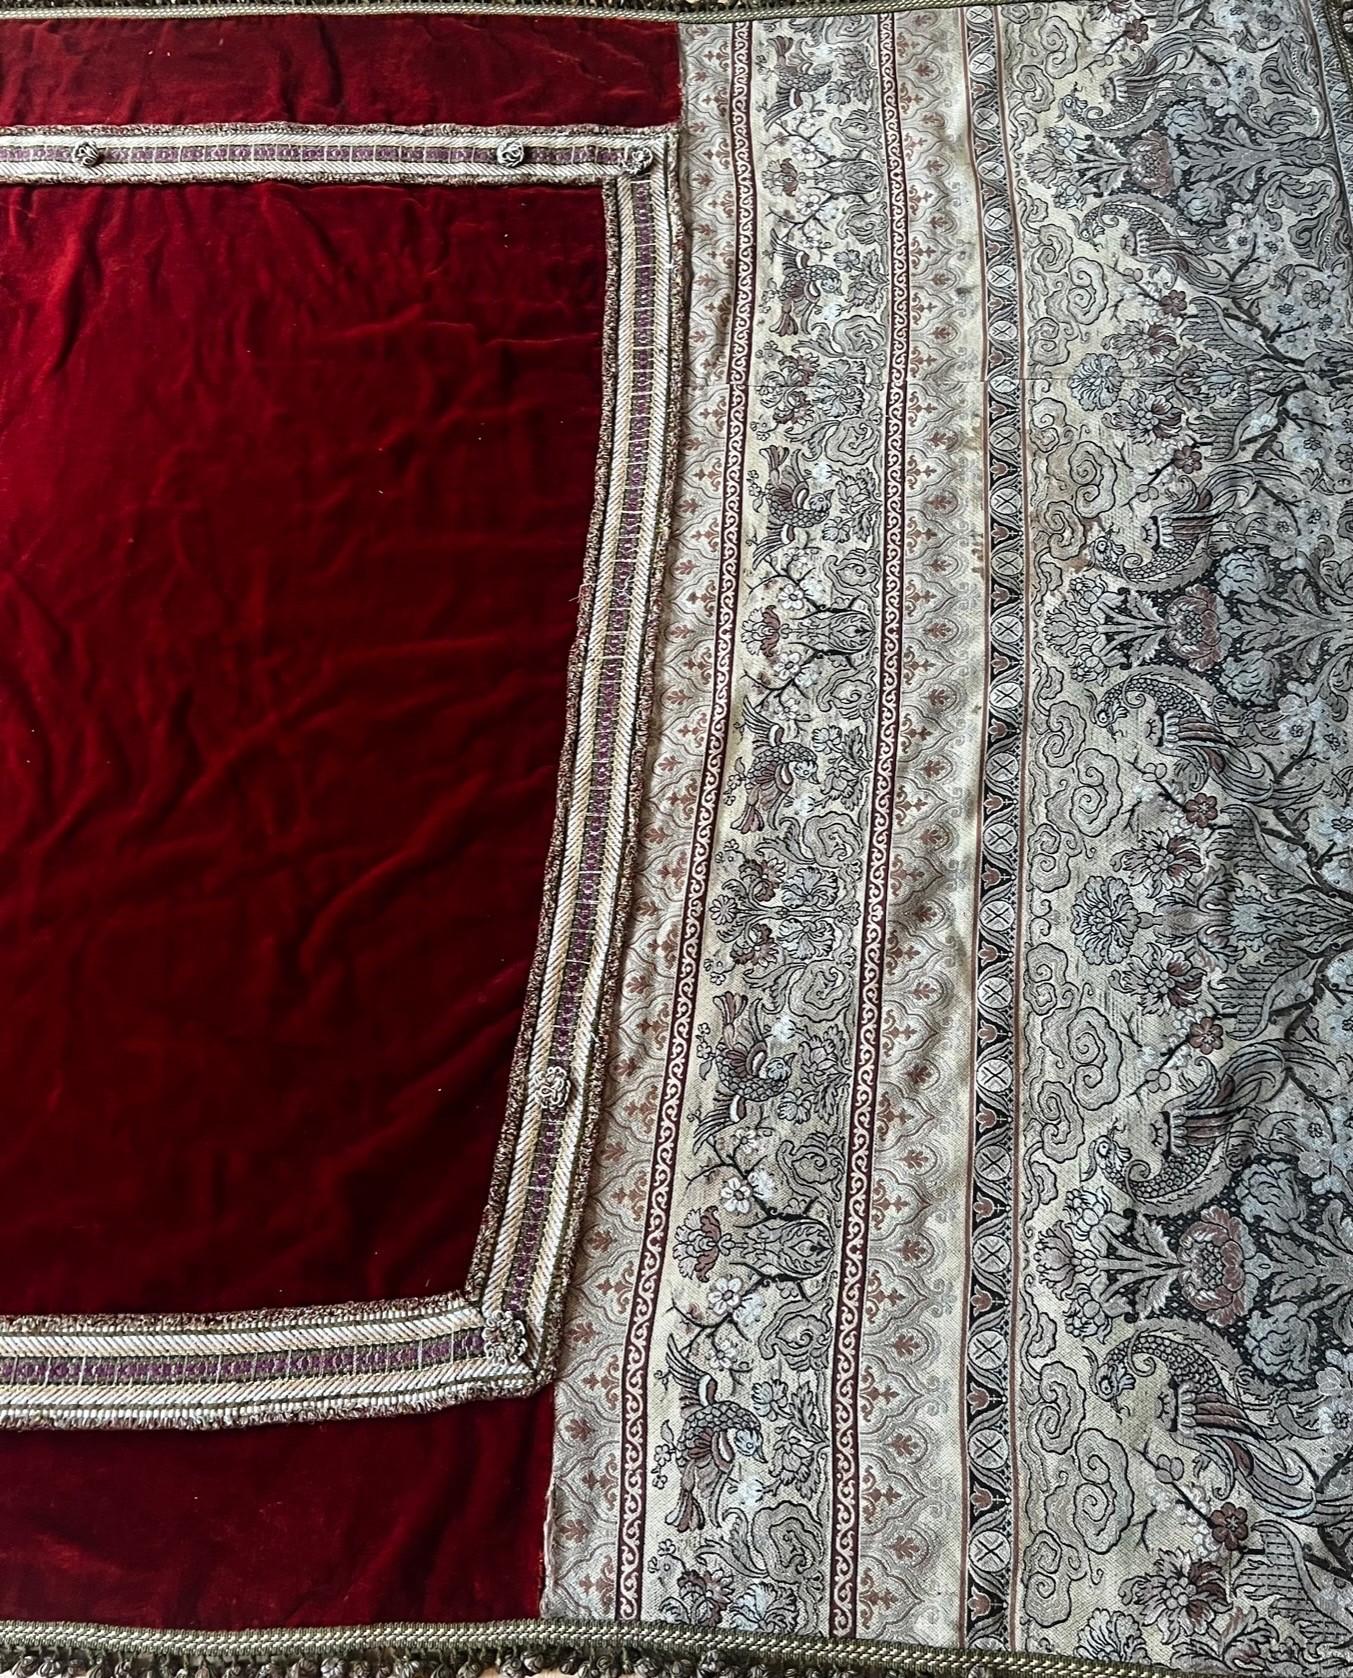 This is a truly exquisite antique silk velvet wall hanging with hand woven floral peacock design and metal threads as a patchwork. The history of Velvet goes back to 13th century and refers to items owned by Pope Clement V- two red Velvet from the